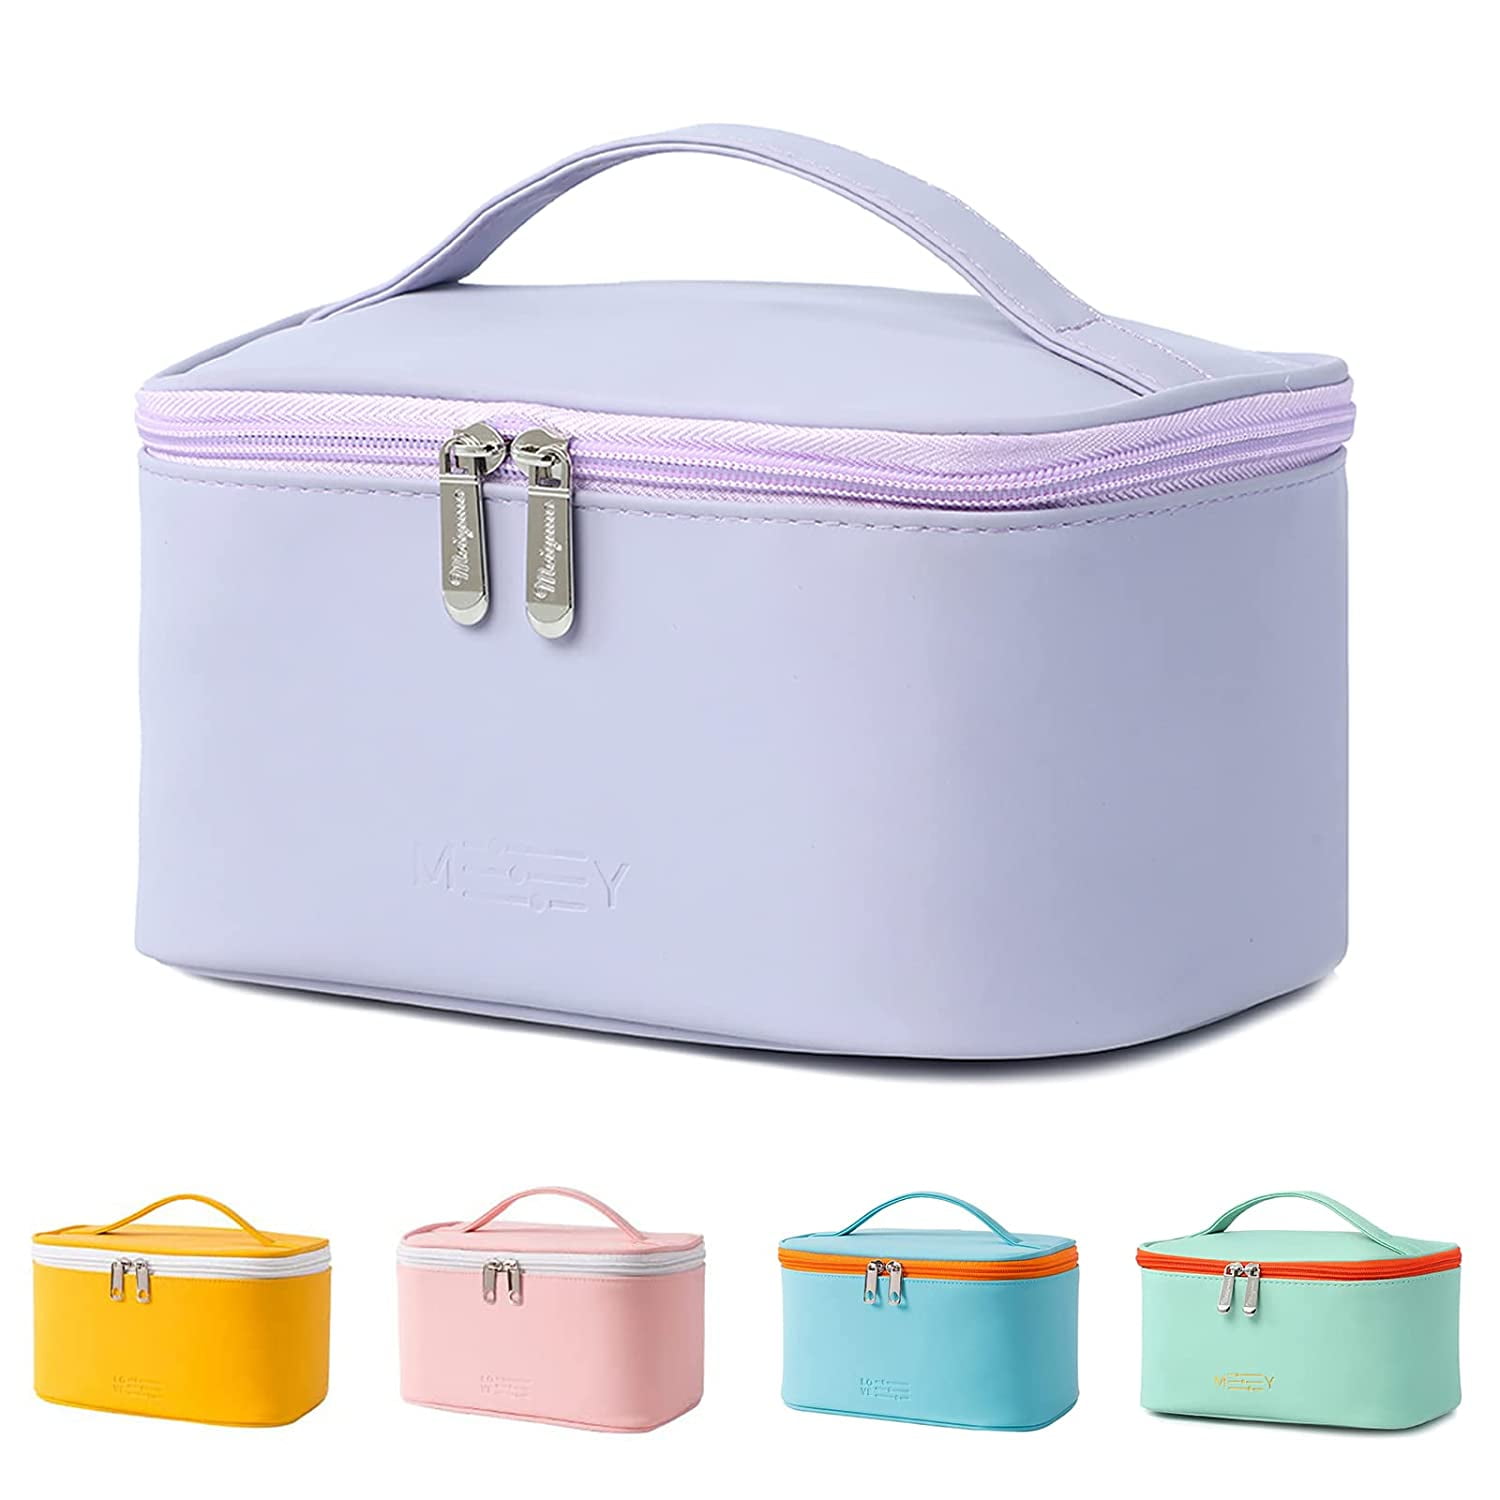 6065 Portable Makeup Bag Widely Used By Womens For Storing Their Makeup